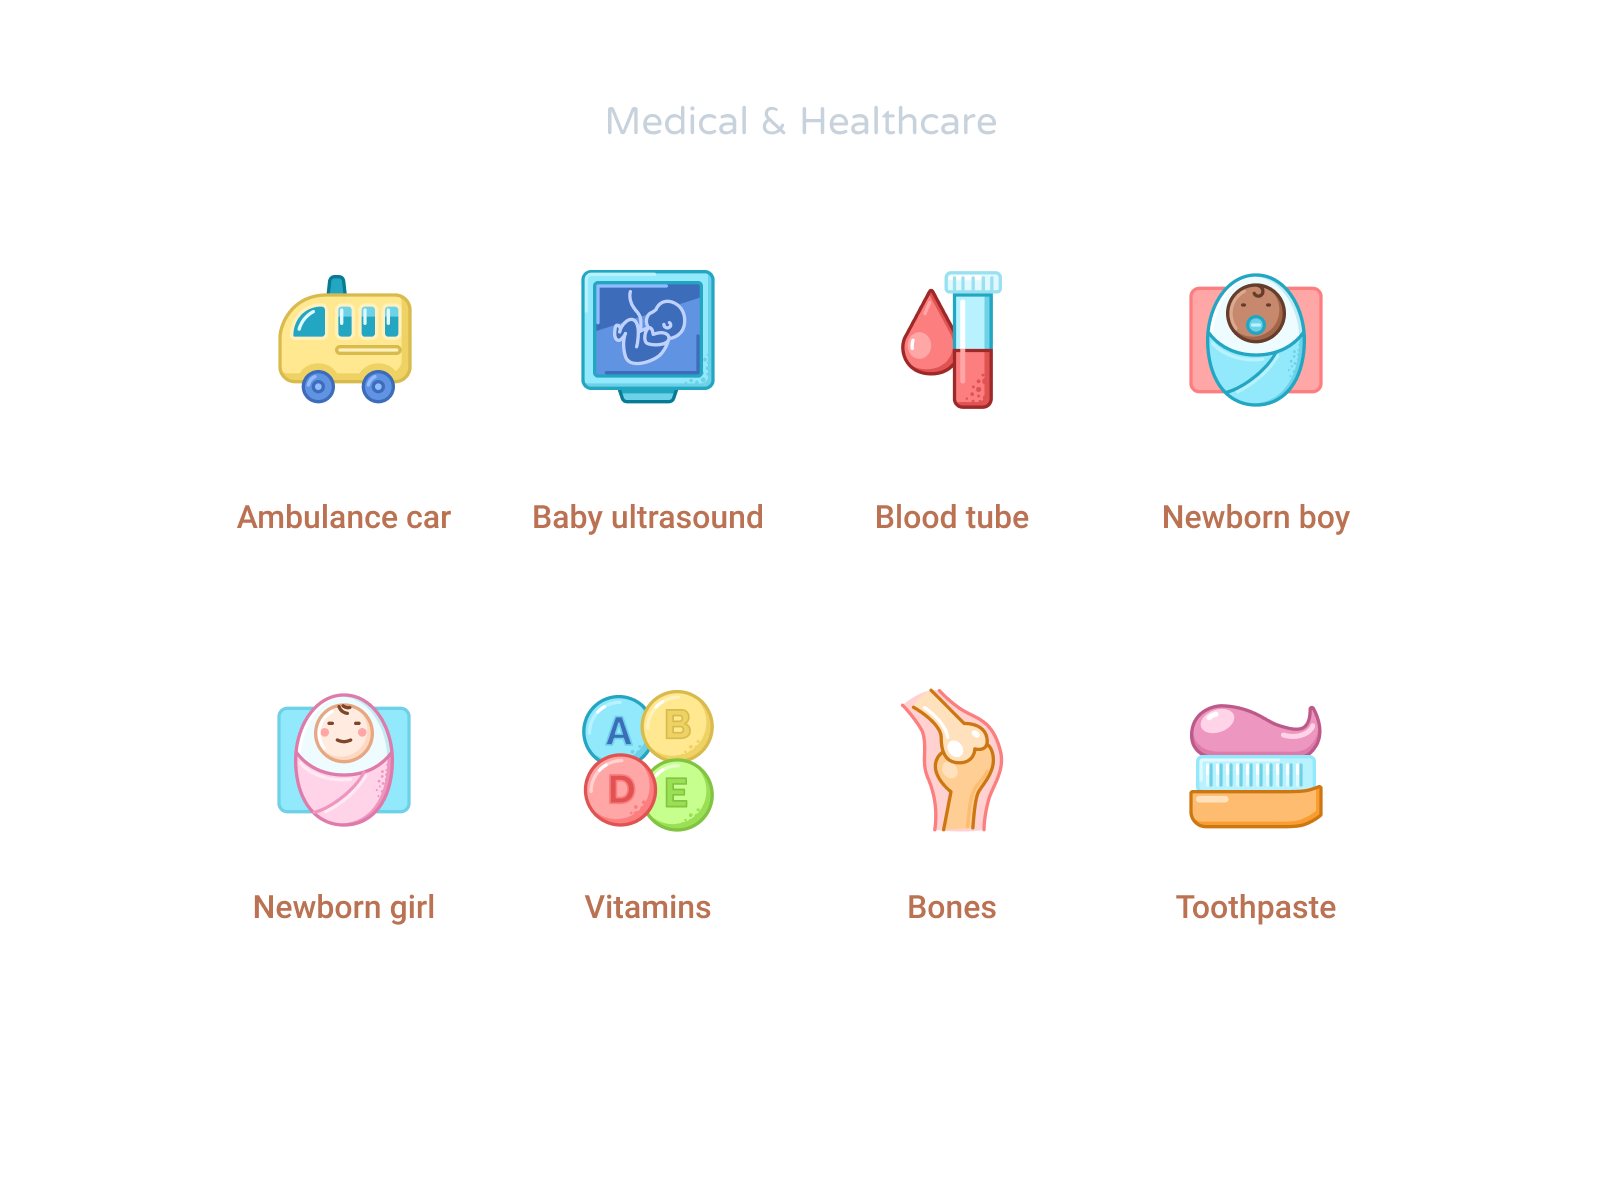 Medical And Healthcare Icons Set 6 By Rengised On Dribbble 5903